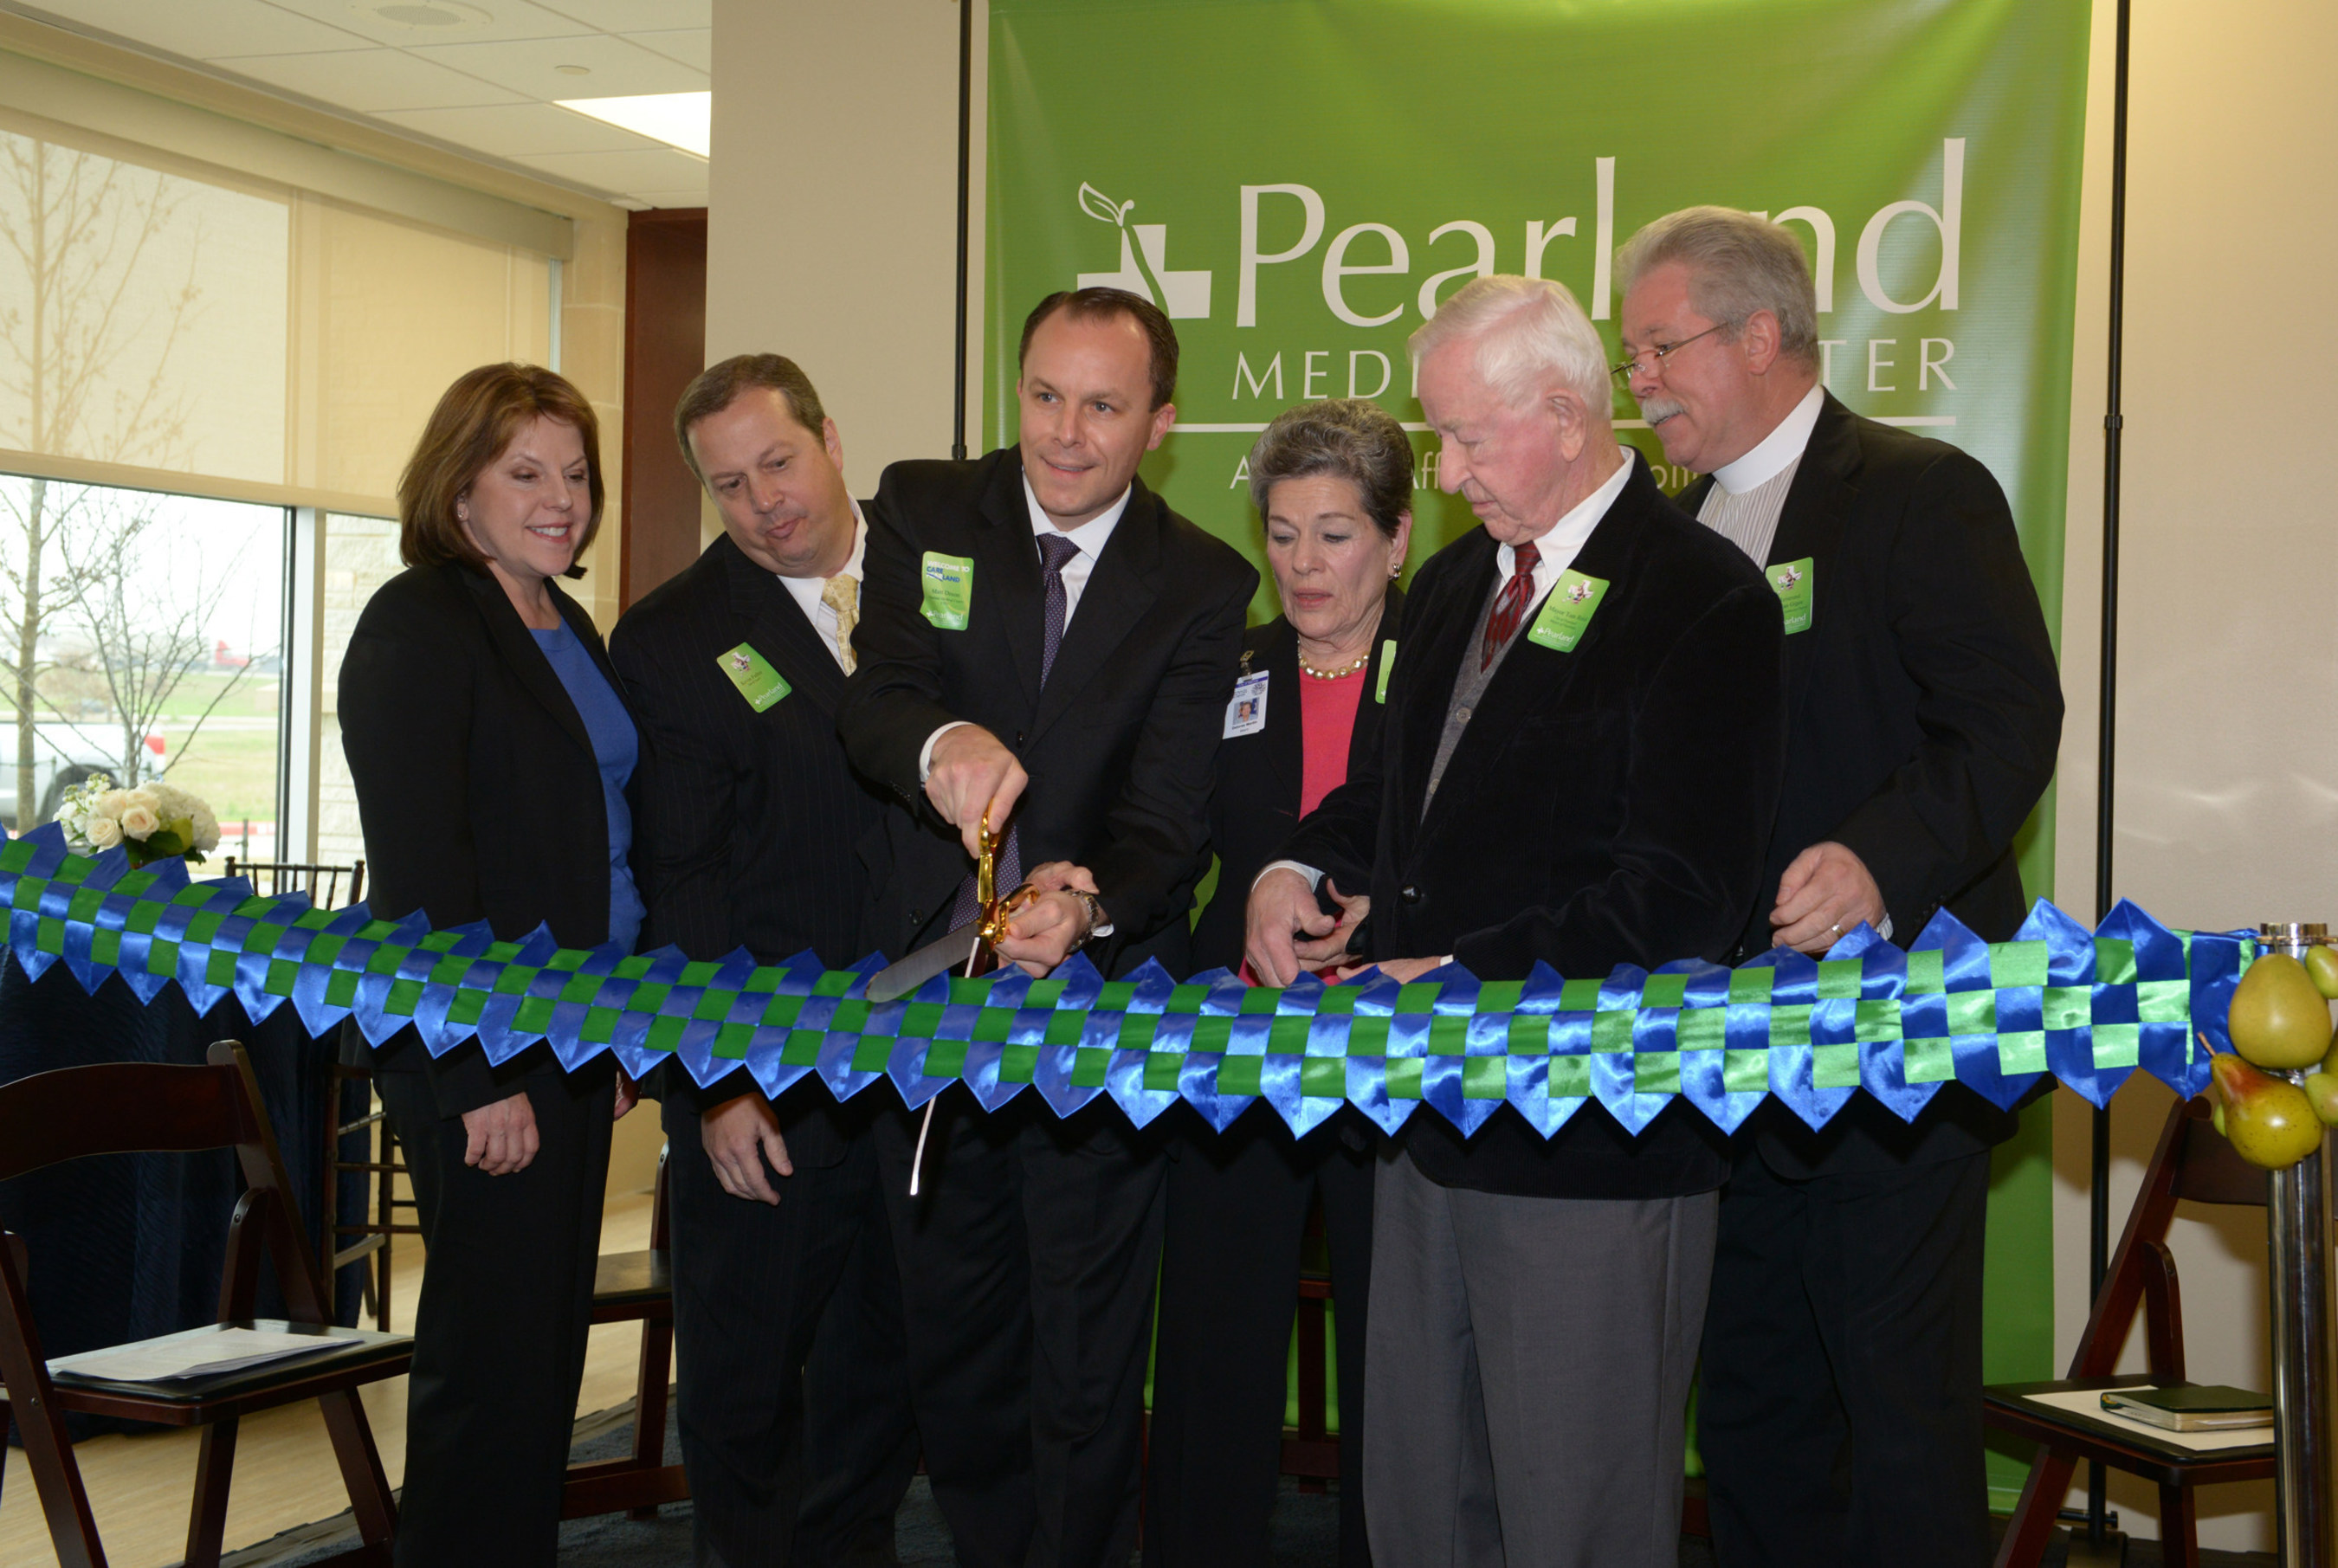 HCA Gulf Coast Division President, Maura Walsh; Pearland Medical Center Board of Trustees Chairman, Kevin Fuller; Pearland Medical Center CEO, Matt Dixon; Manvel Mayor, Delores Martin; Pearland Mayor, Tom Reid; and Reverend Brian Gigee "Cut the Ribbon" on Friday, January 9th for the new $71 million Pearland Medical Center.